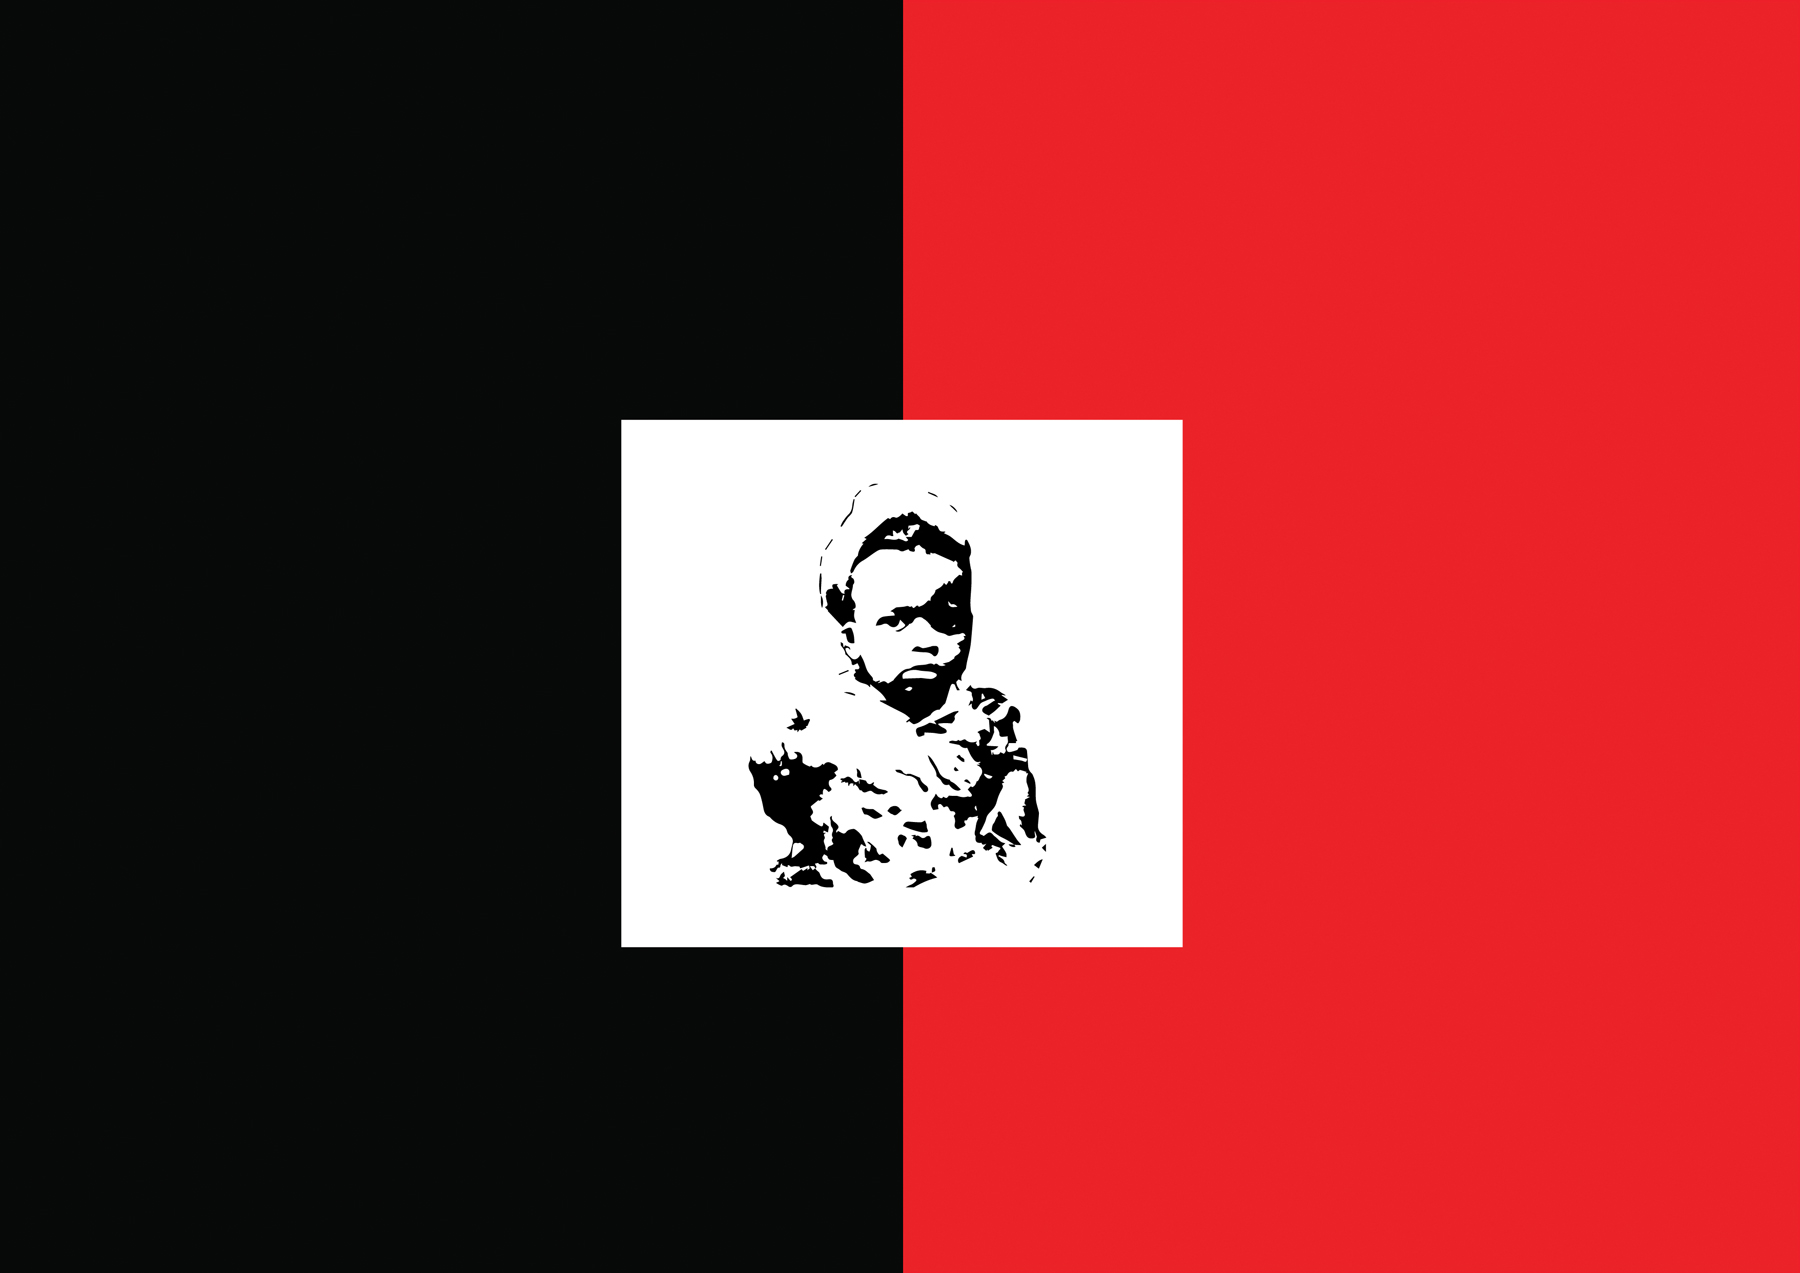 Rectangular, flag-like design that is black on the left and red on the right with a black and white image of a young boy in the center